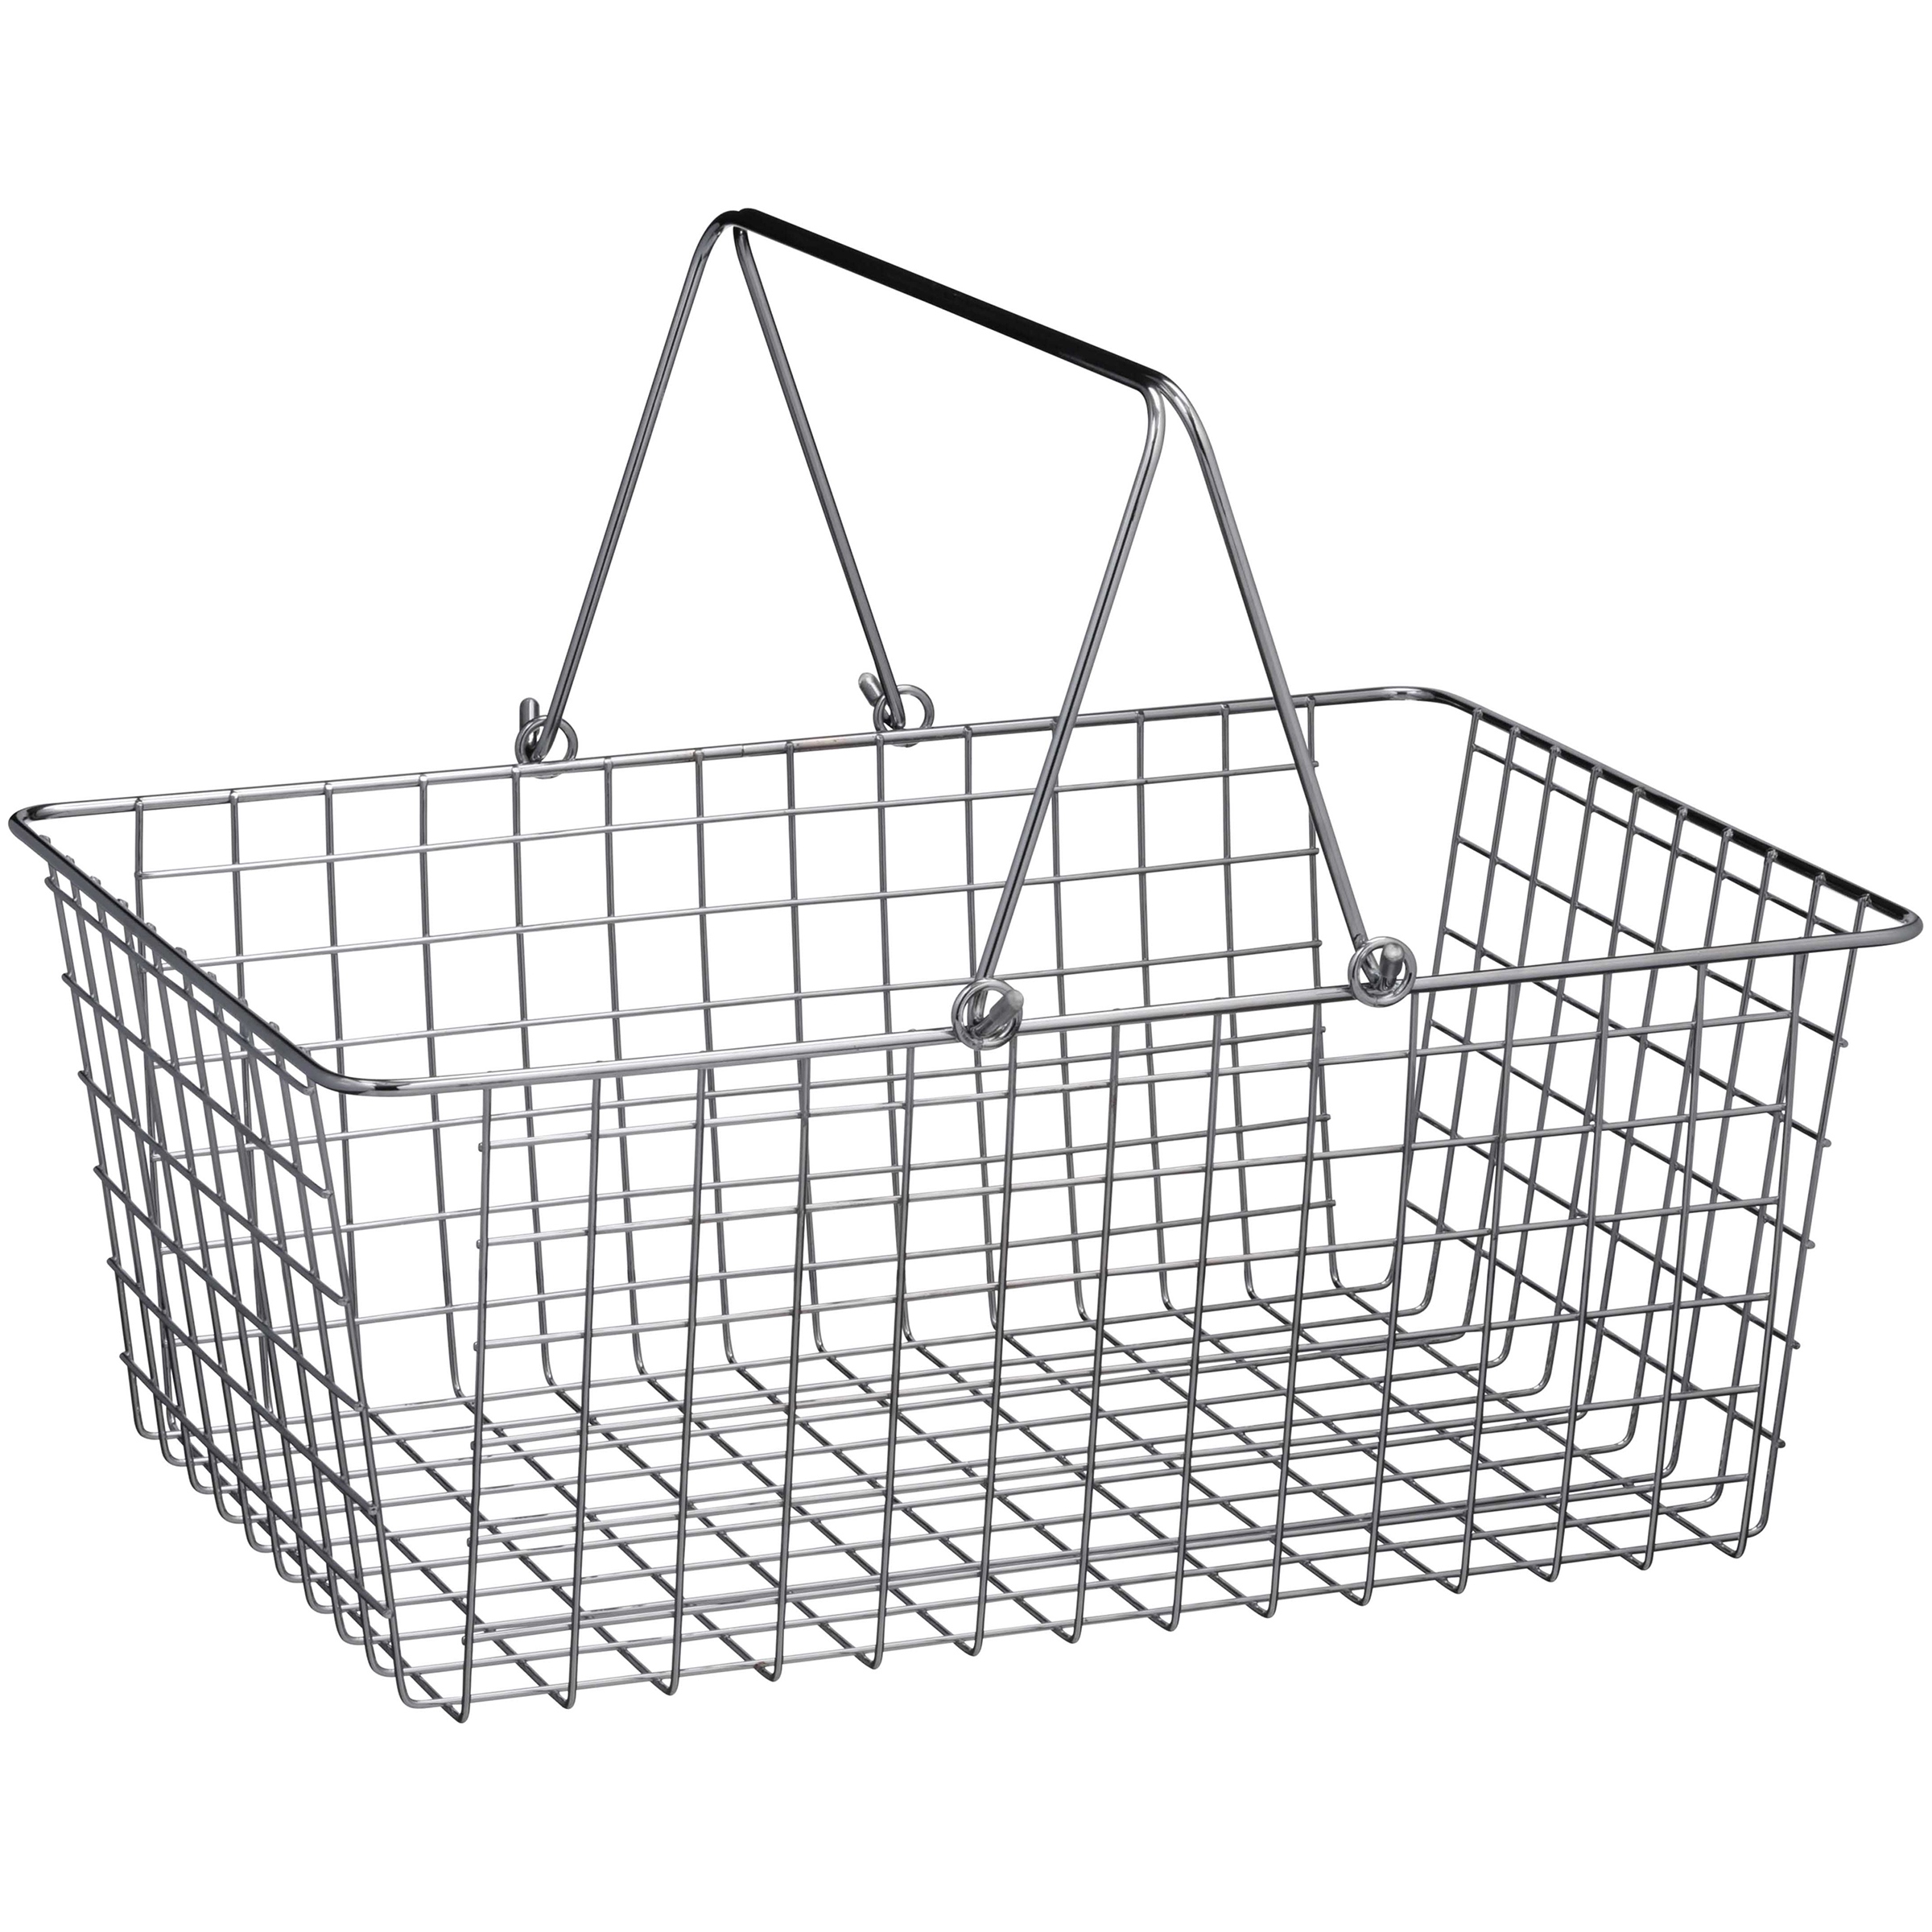 Spectrum Diversified Steel Wire Storage Basket with Handles for Pantry, Countertop and More, Large, Chrome - image 1 of 13